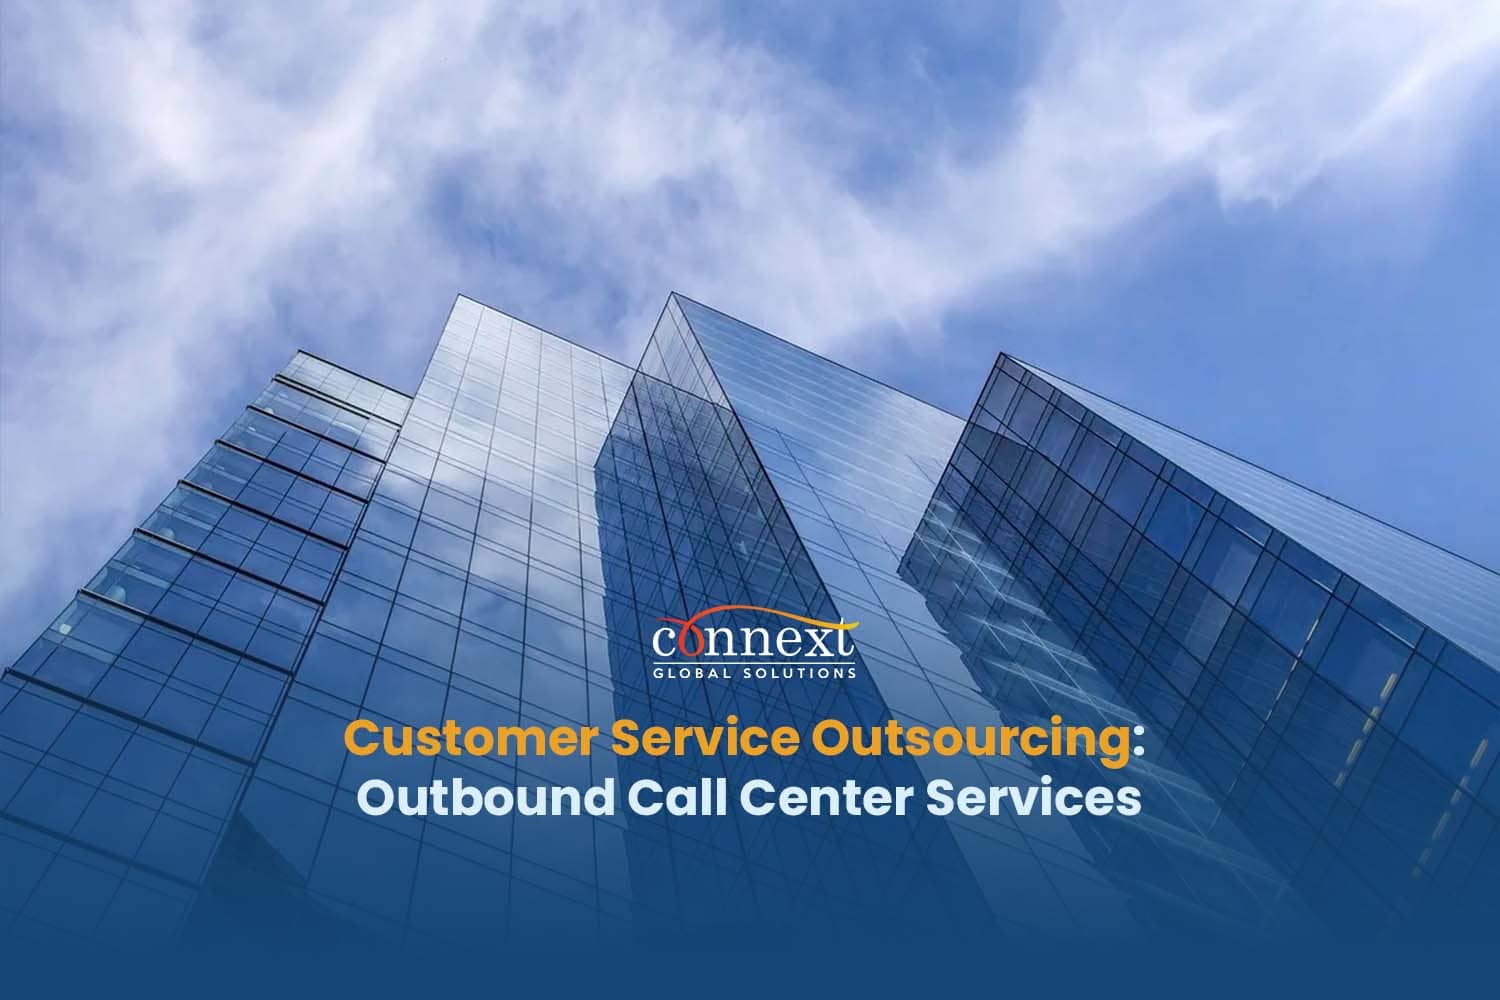 Customer Service Outsourcing Solutions: Outbound Call Center Services